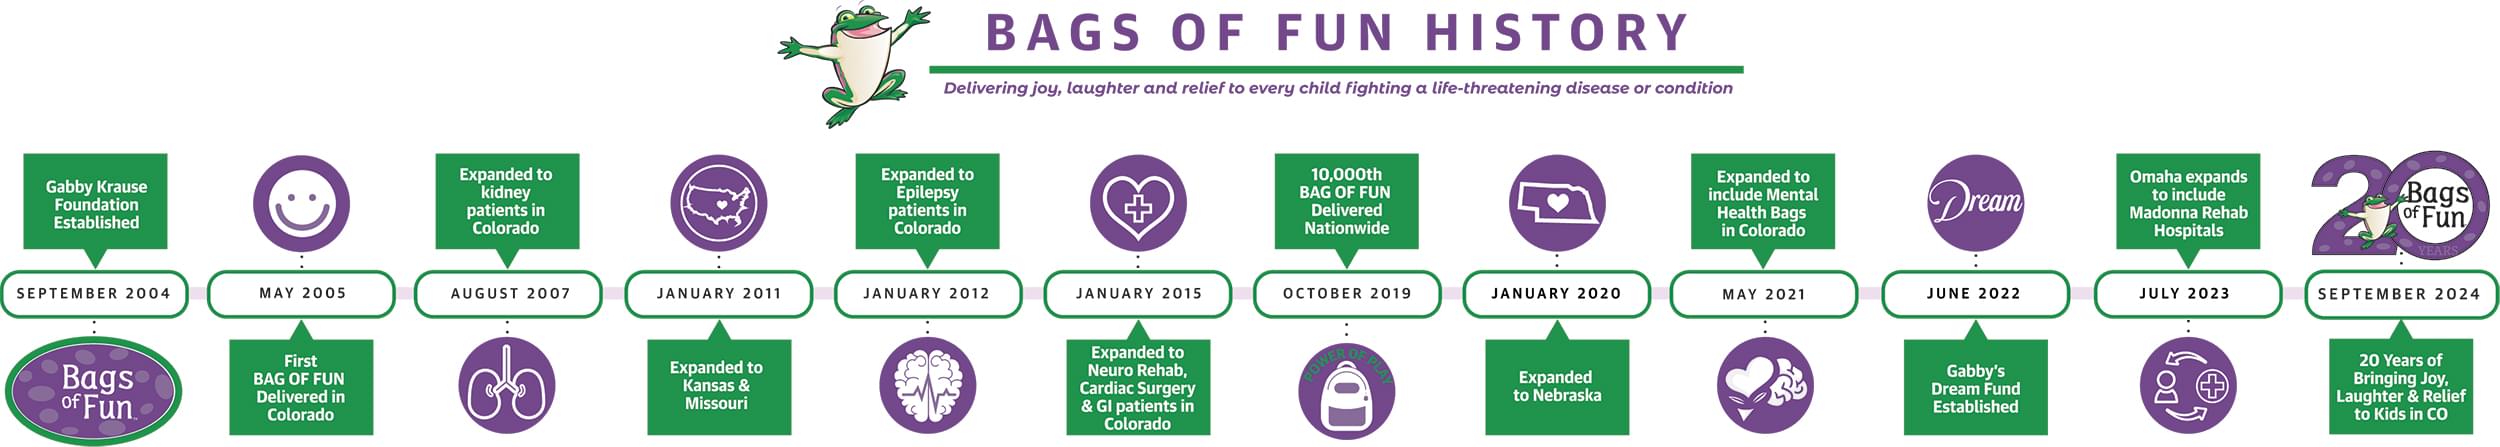 BAGS OF FUN HISTORY - Delivering joy, laughter and relief to every child fighting a life-threatening disease or condition. SEPTEMBER 2004: Gabby Krause Foundation Established. MAY 2005: First BAG OF FUN Delivered in Colorado. AUGUST 2007: Expanded to kidney patients in Colorado. JANUARY 2011: Expanded to Kansas & Missouri. JANUARY 2012: Expanded to Epilepsy patients in Colorado. JANUARY 2015: Expanded to Nuero Rehab, Cardiac Surgery & GI patients in Colorado. OCTOBER 2019: 10,000th BAG OF FUN Delivered Nationwide. JANUARY 2020: Expanded to Nebraska. MAY 2021: Expanded to include Mental Health Bags in Colorado. JUNE 2022 - Gabby's Dream Fund Established. July 2023: Omaha expands to include Madonna Rehab Hospitals. September 2024: 20 years of Bringing Joy Laughter and Relief to kids in Colorado. 20 years of Bags of Fun.